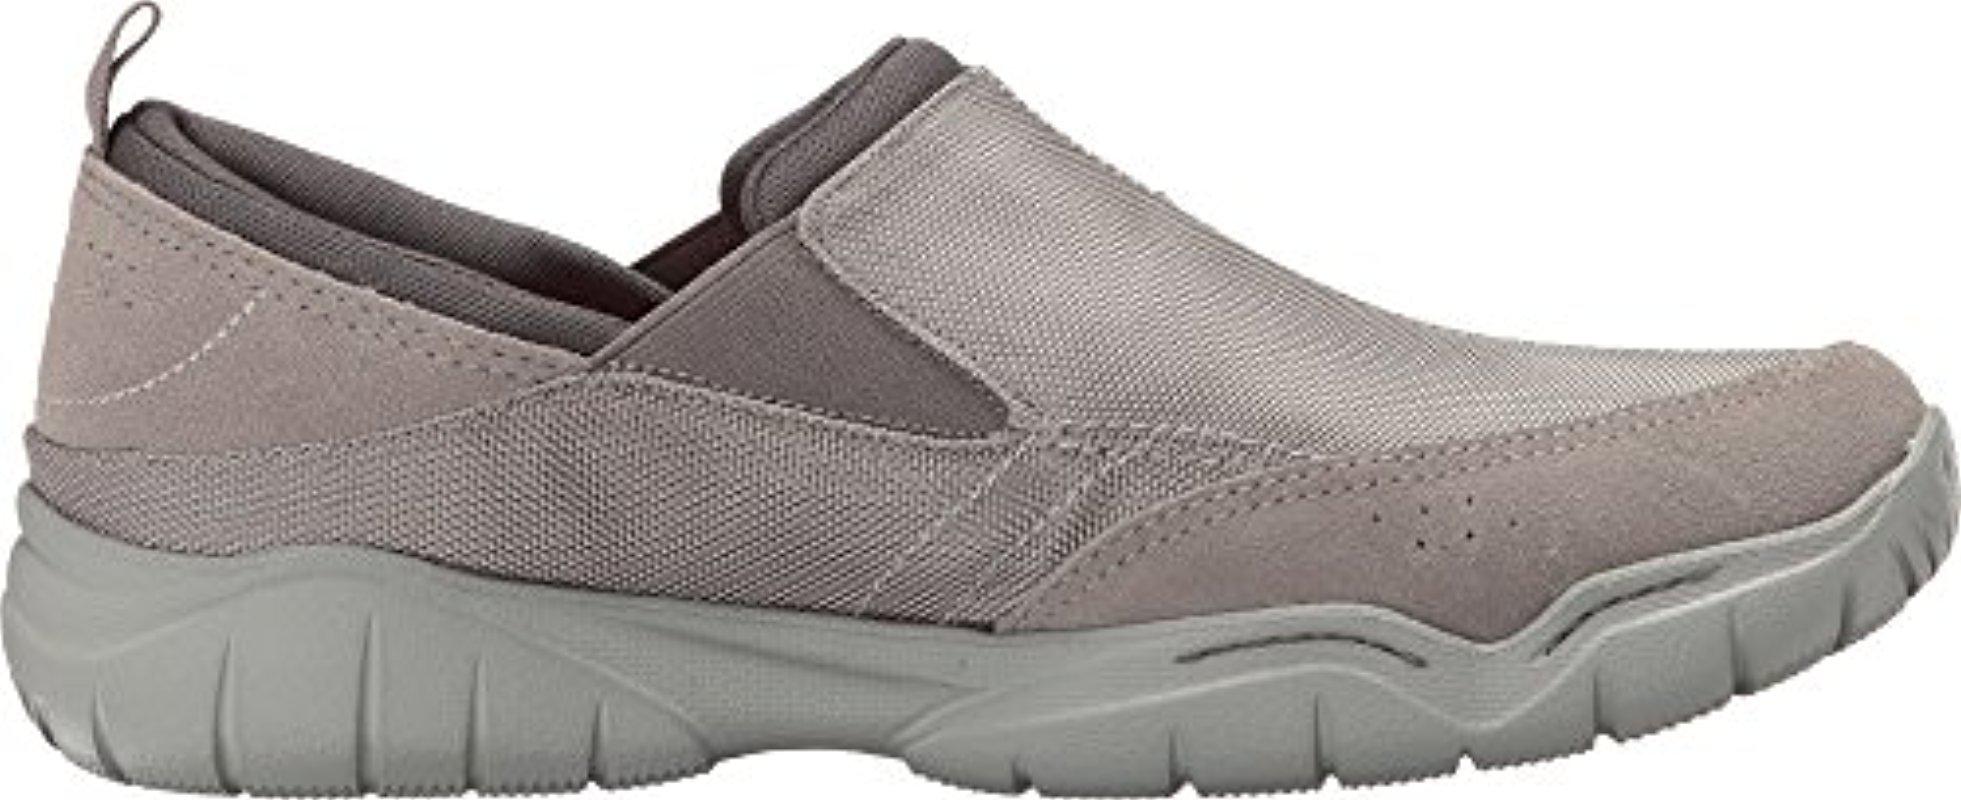 Crocs™ Synthetic Swiftwater Edge Moc M Sneaker in Charcoal/Light Grey ...